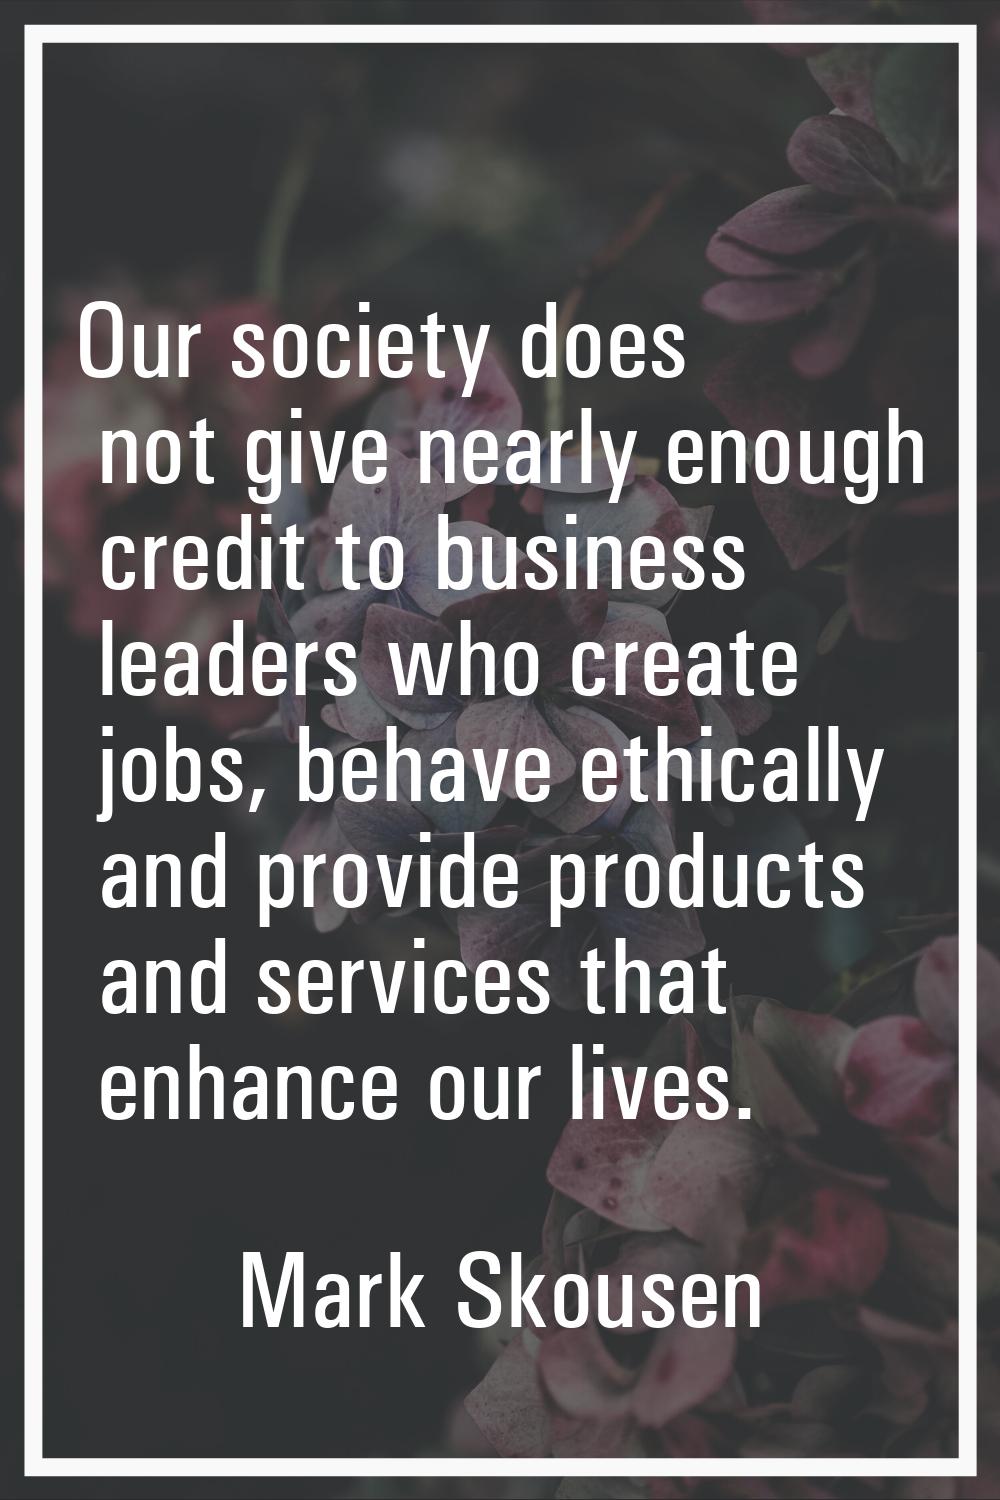 Our society does not give nearly enough credit to business leaders who create jobs, behave ethicall